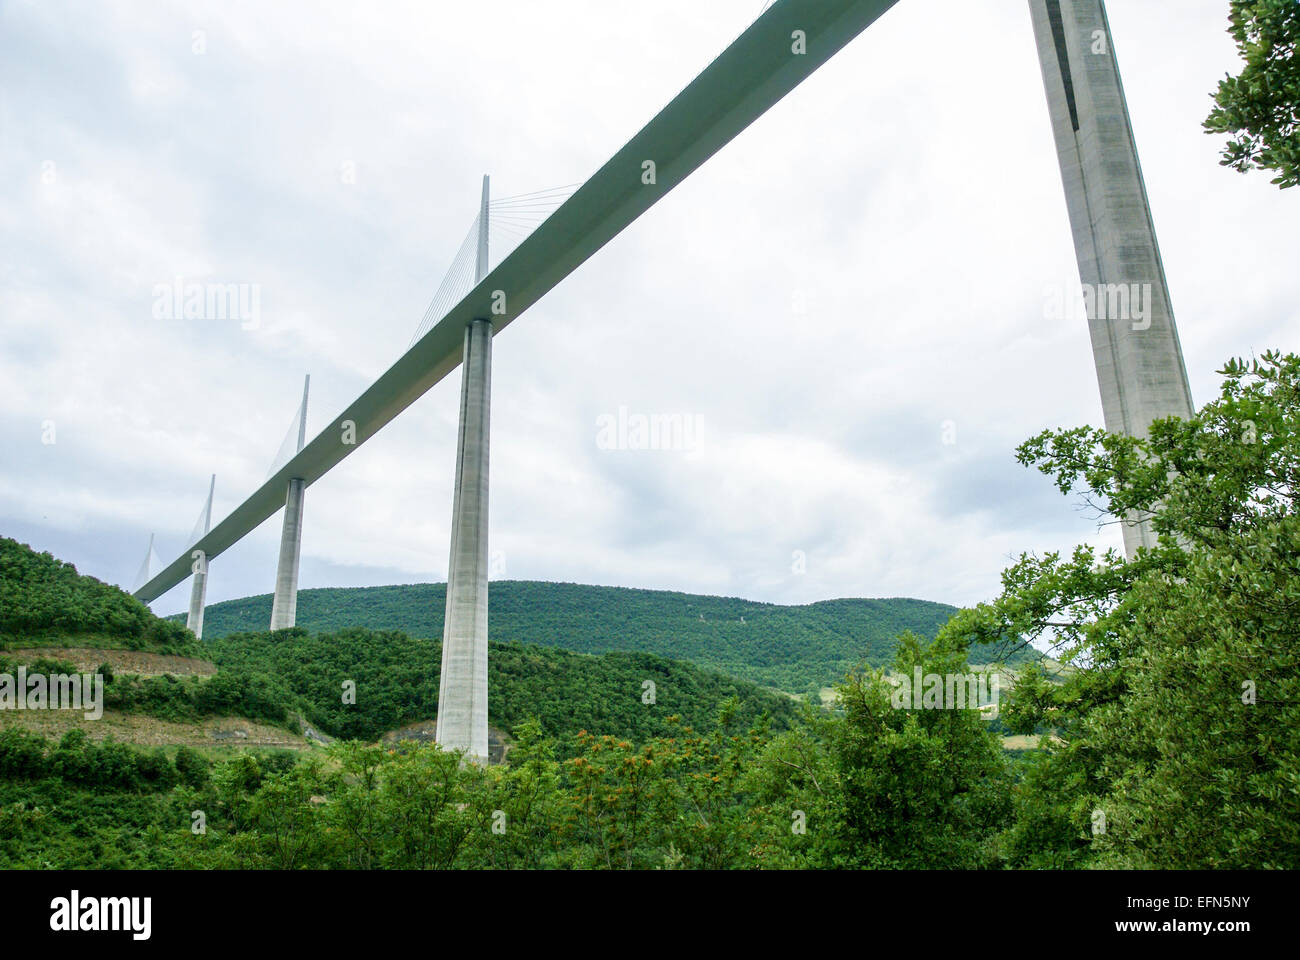 The Millau Viaduct is a cable-stayed bridge that spans the valley of the River Tarn near Millau in southern France. Stock Photo